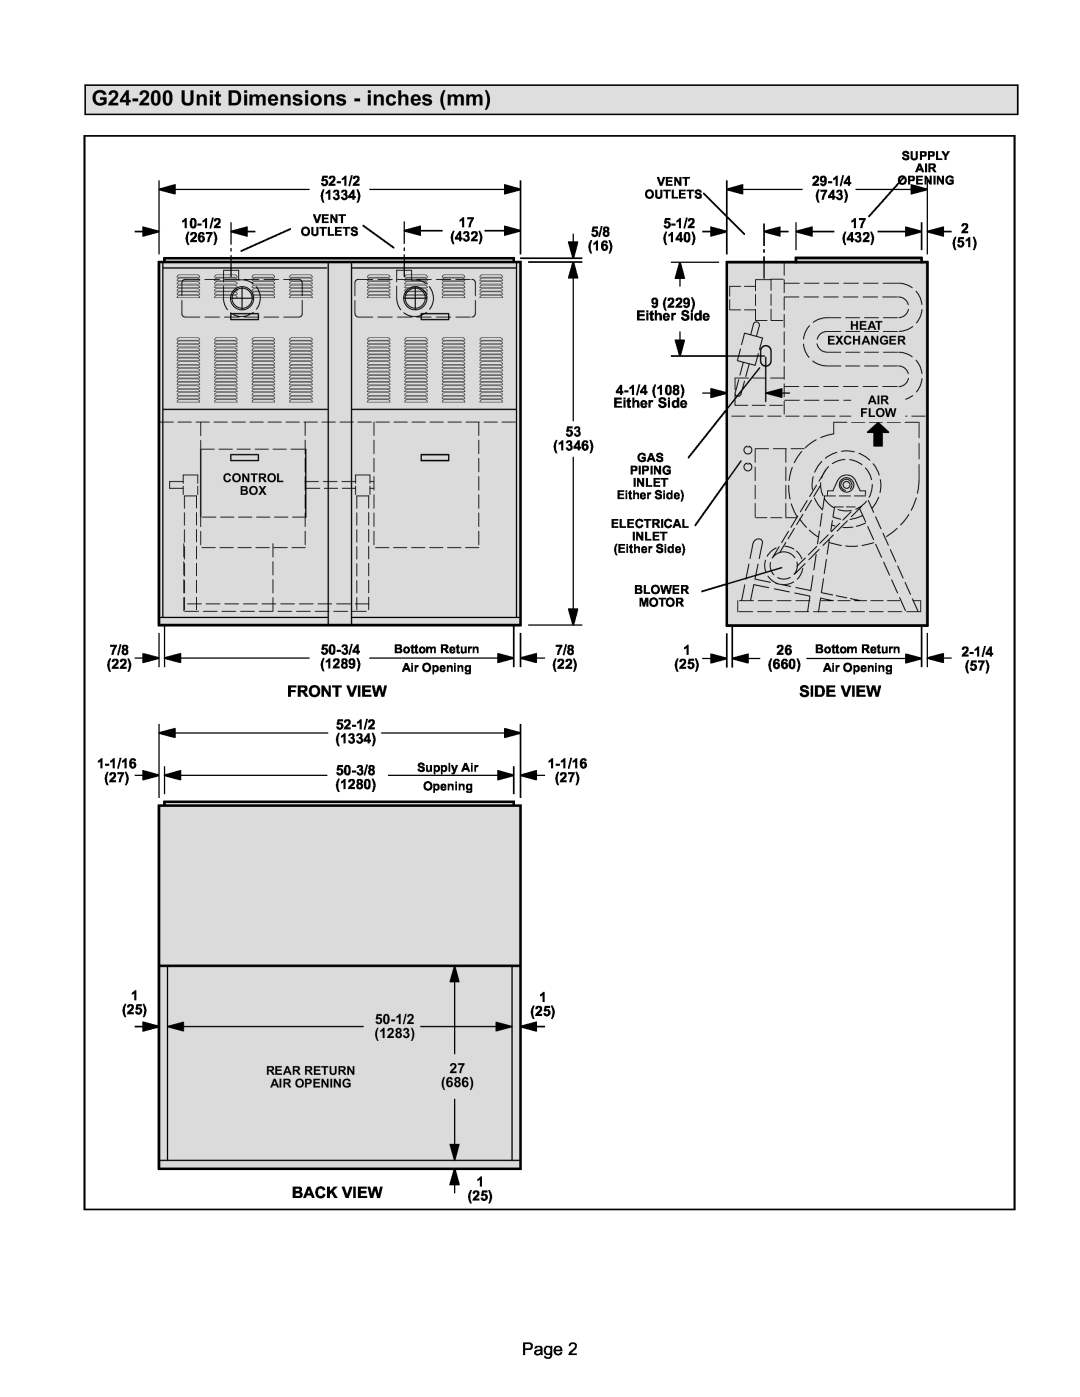 Lennox International Inc G24-200 installation instructions G24−200 Unit Dimensions − inches mm, Page 